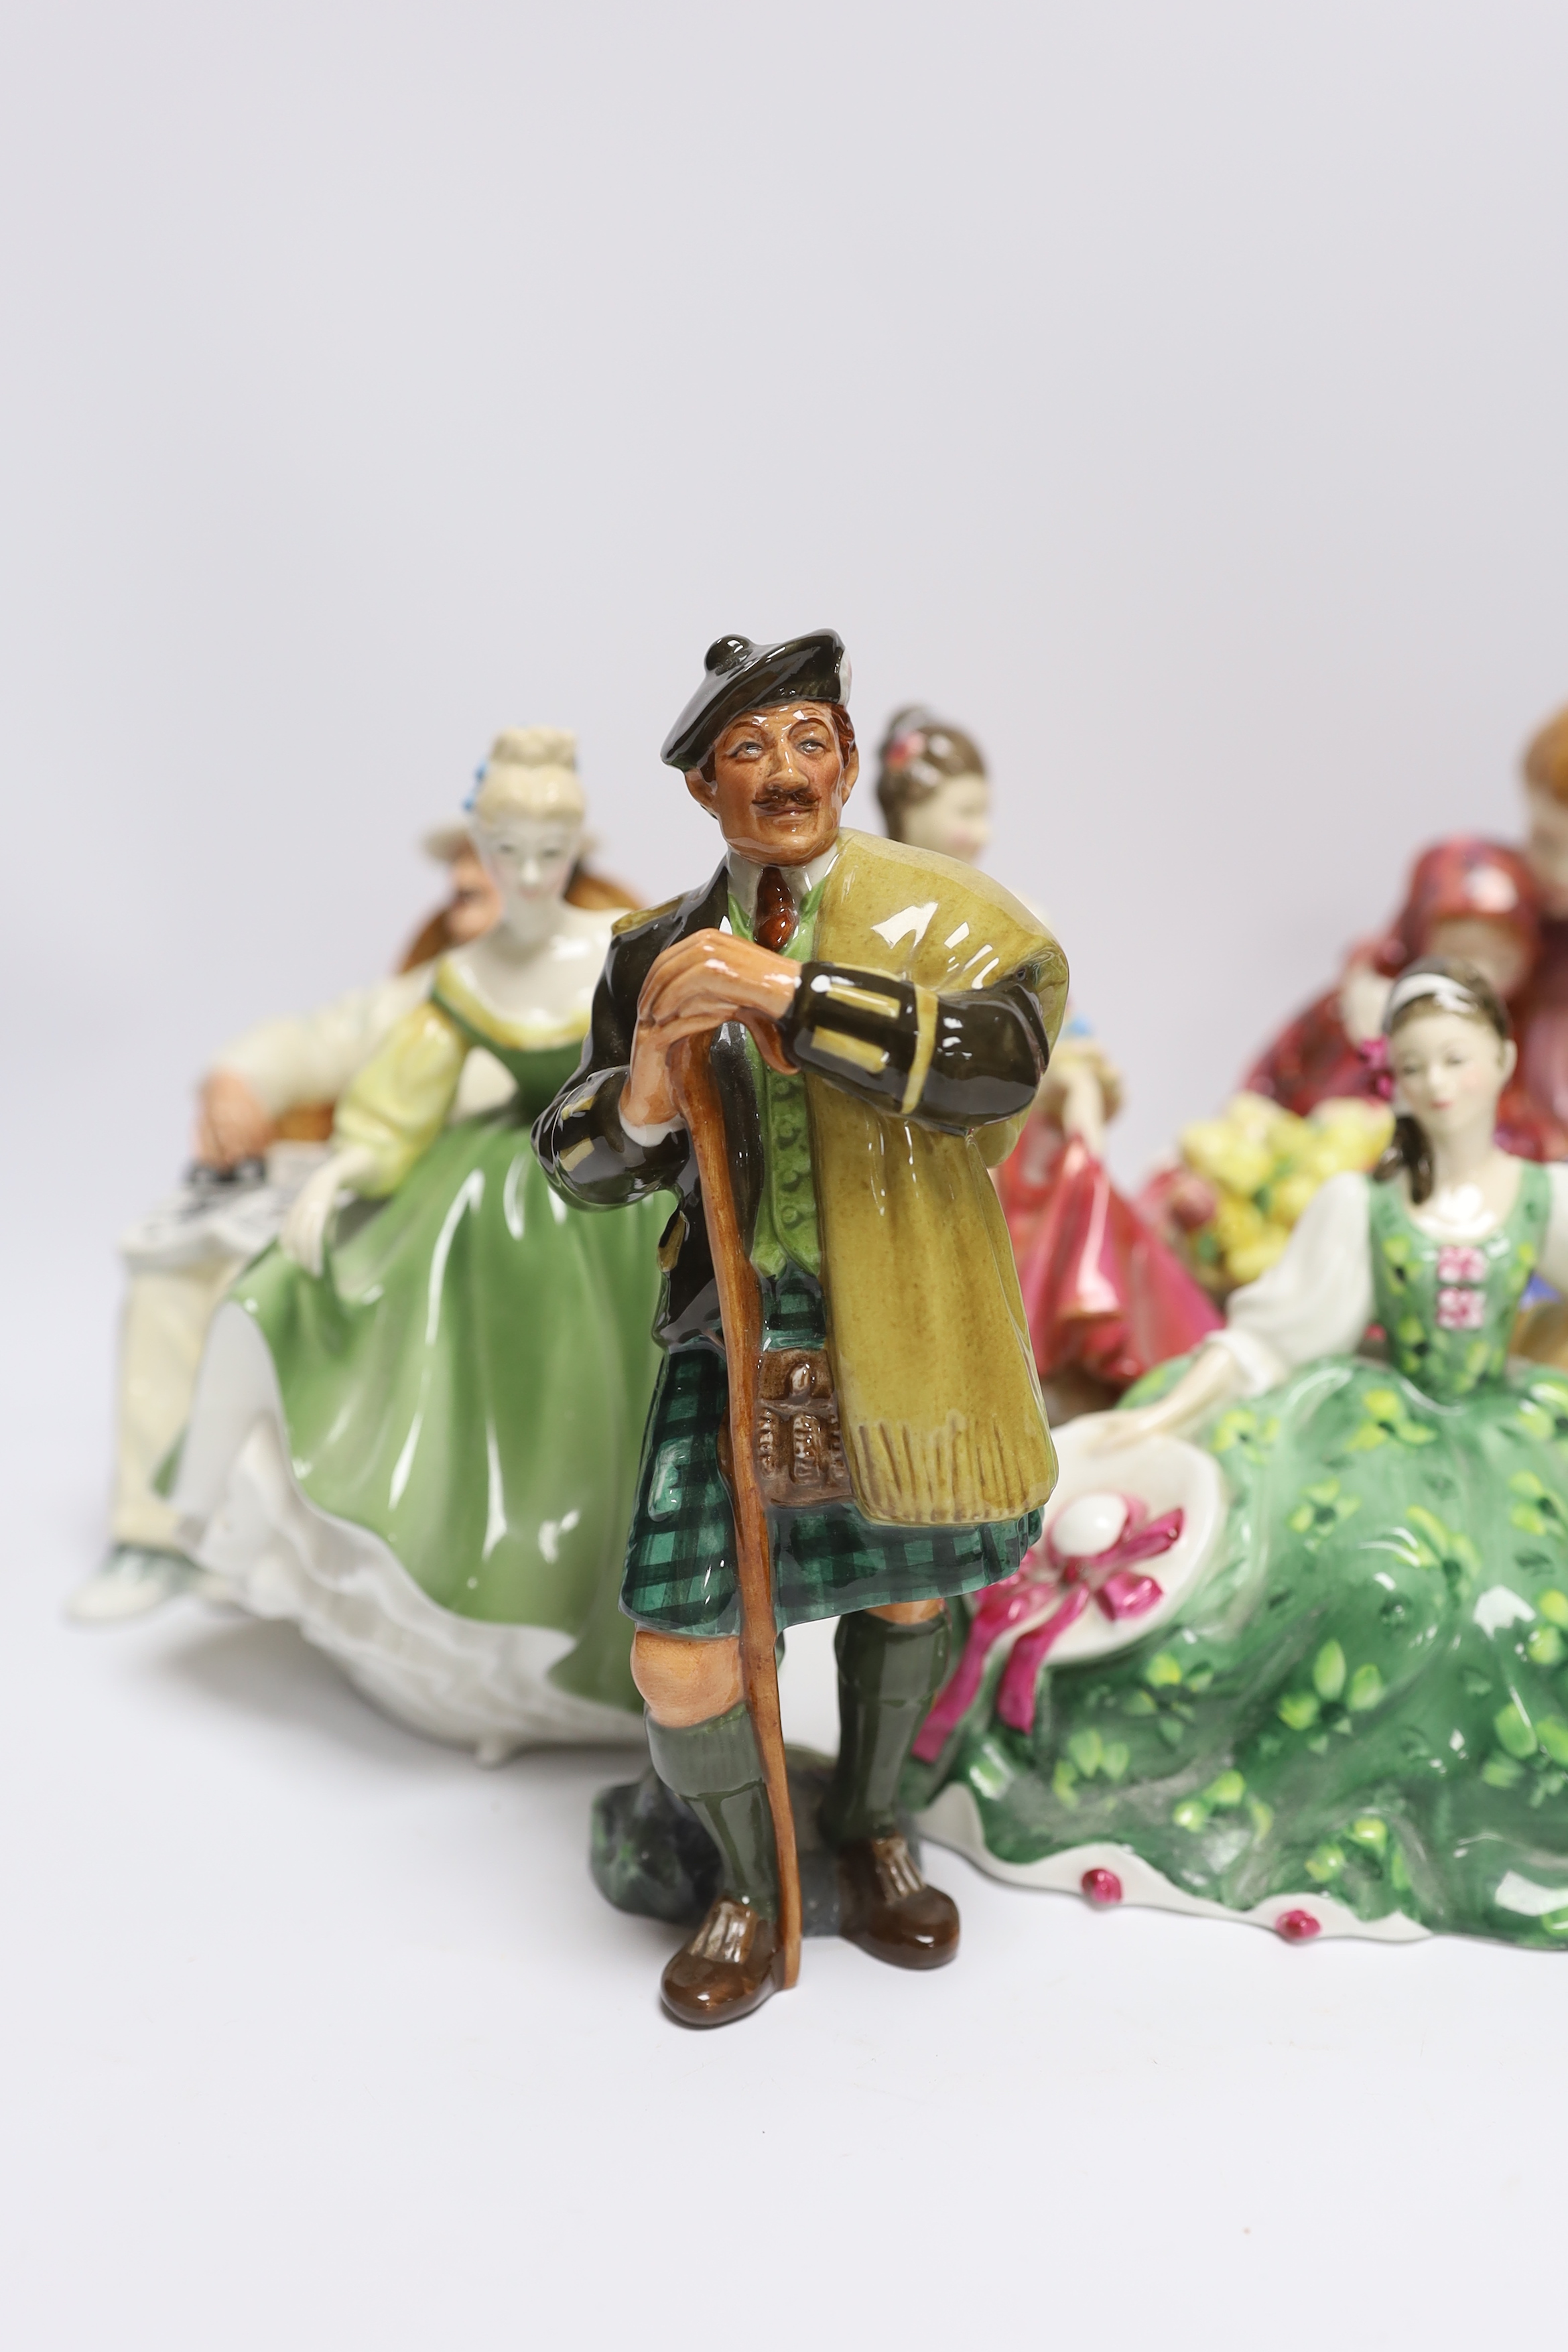 Six various Royal Doulton figures - Southern Belle, Taking Things Easy, Fair Lady, The Laird, Elyse and Flower Sellers Children